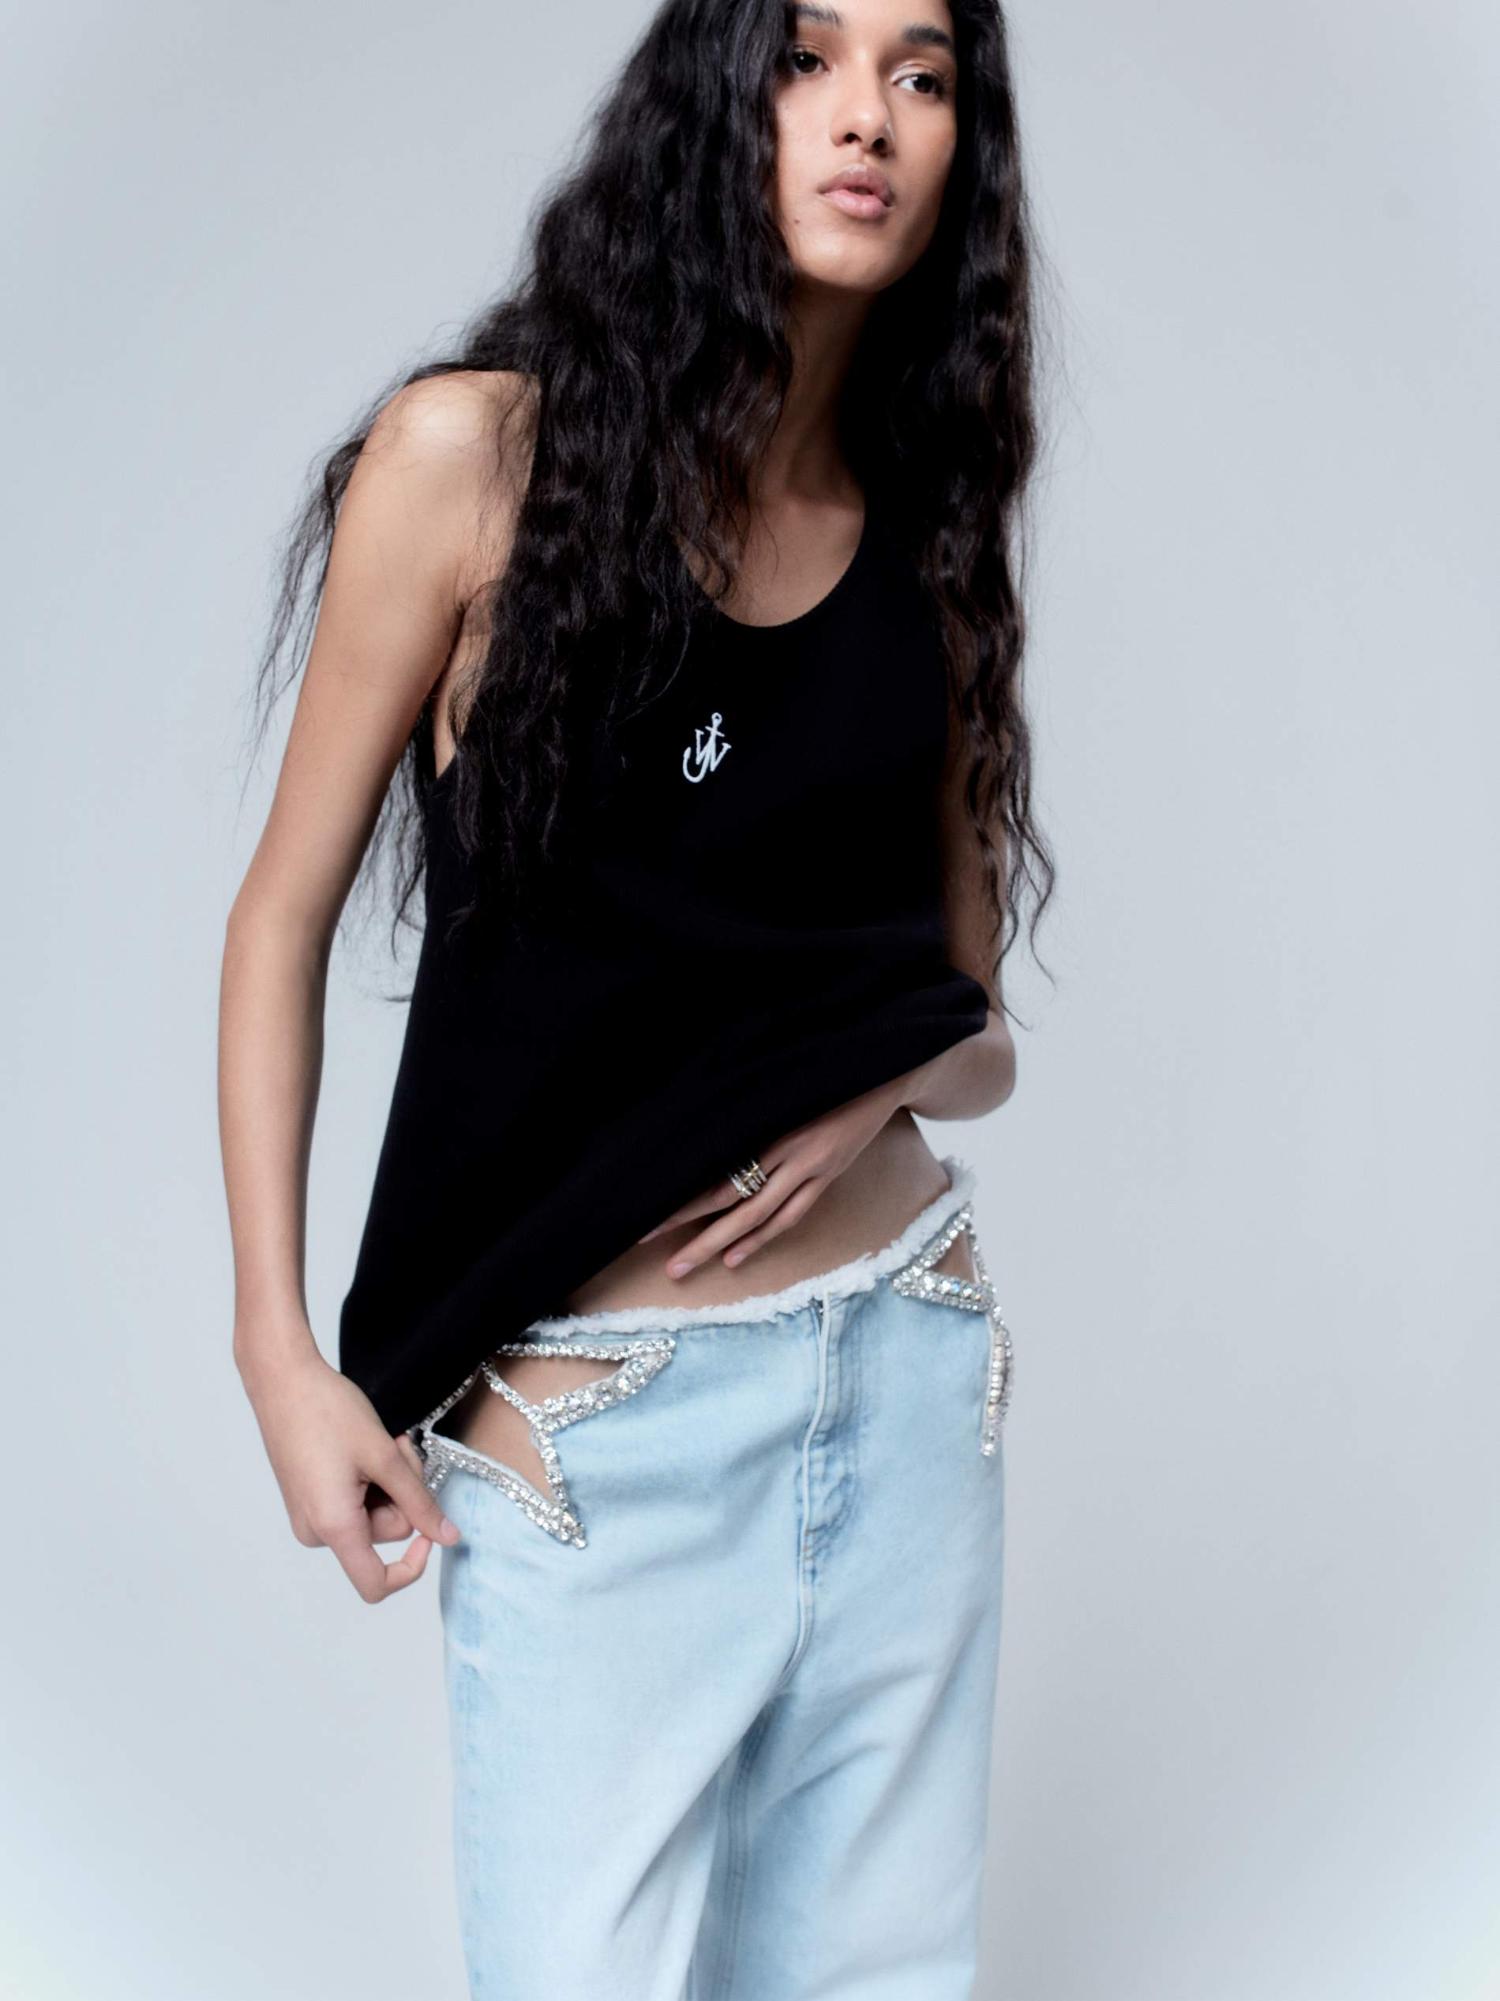 JW Anderson Black Tank Top and Stella McCartney Blue Embroidered Cutout Jeans Net-a-Porter